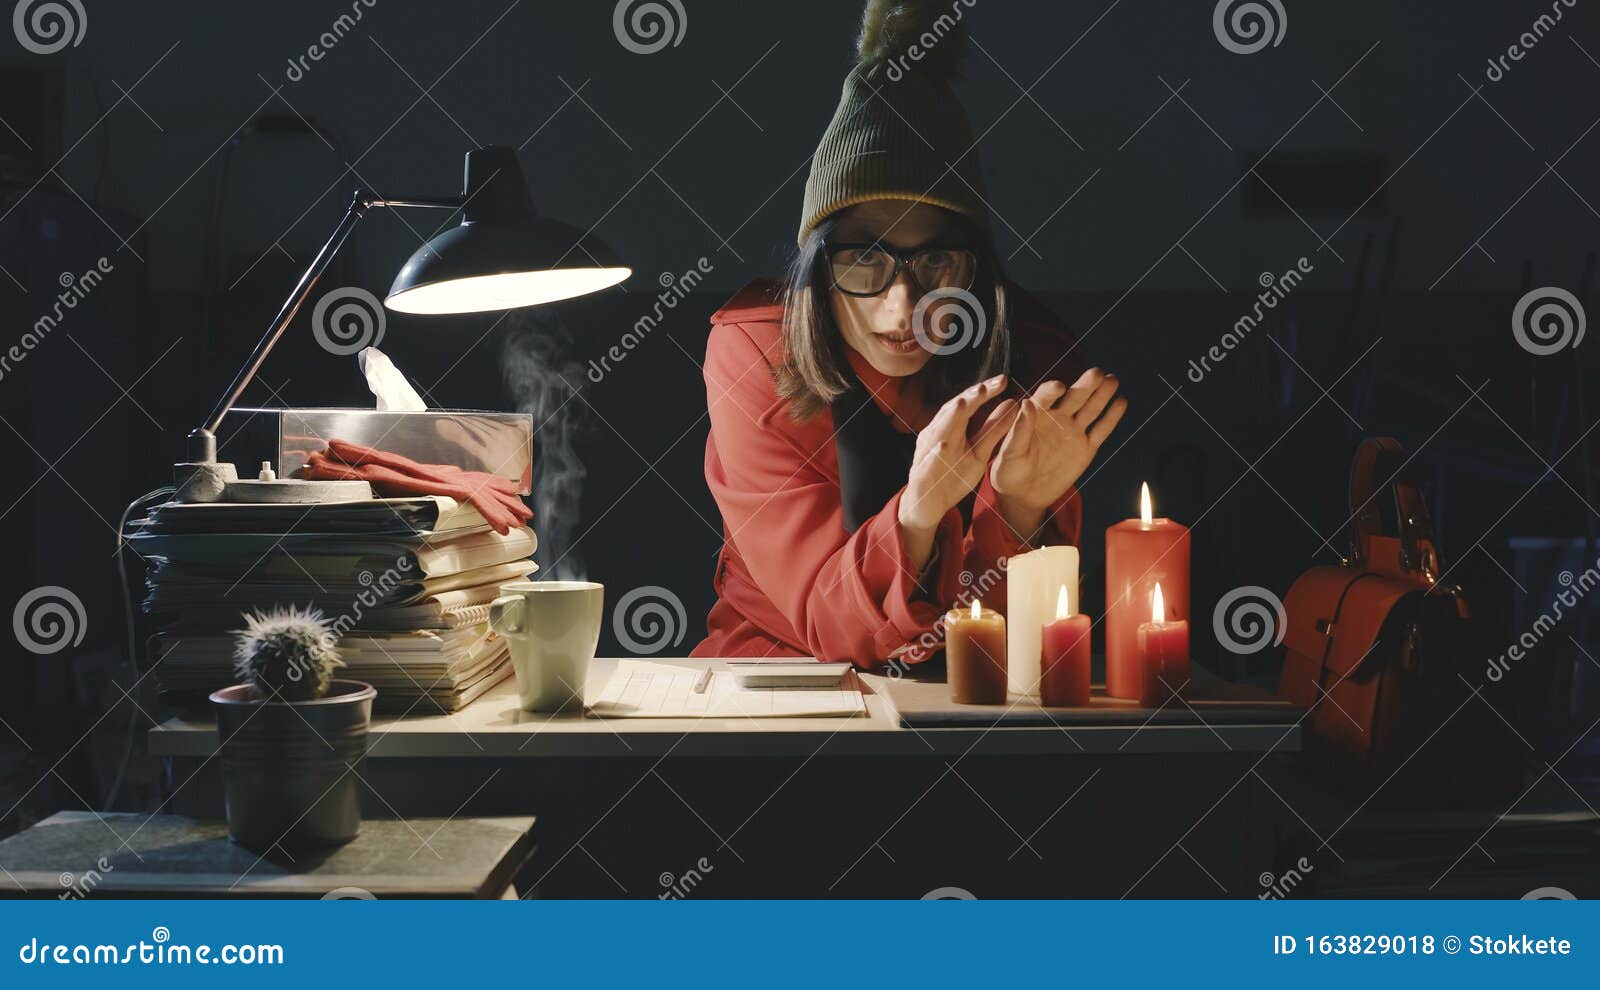 office worker working late at night and freezing